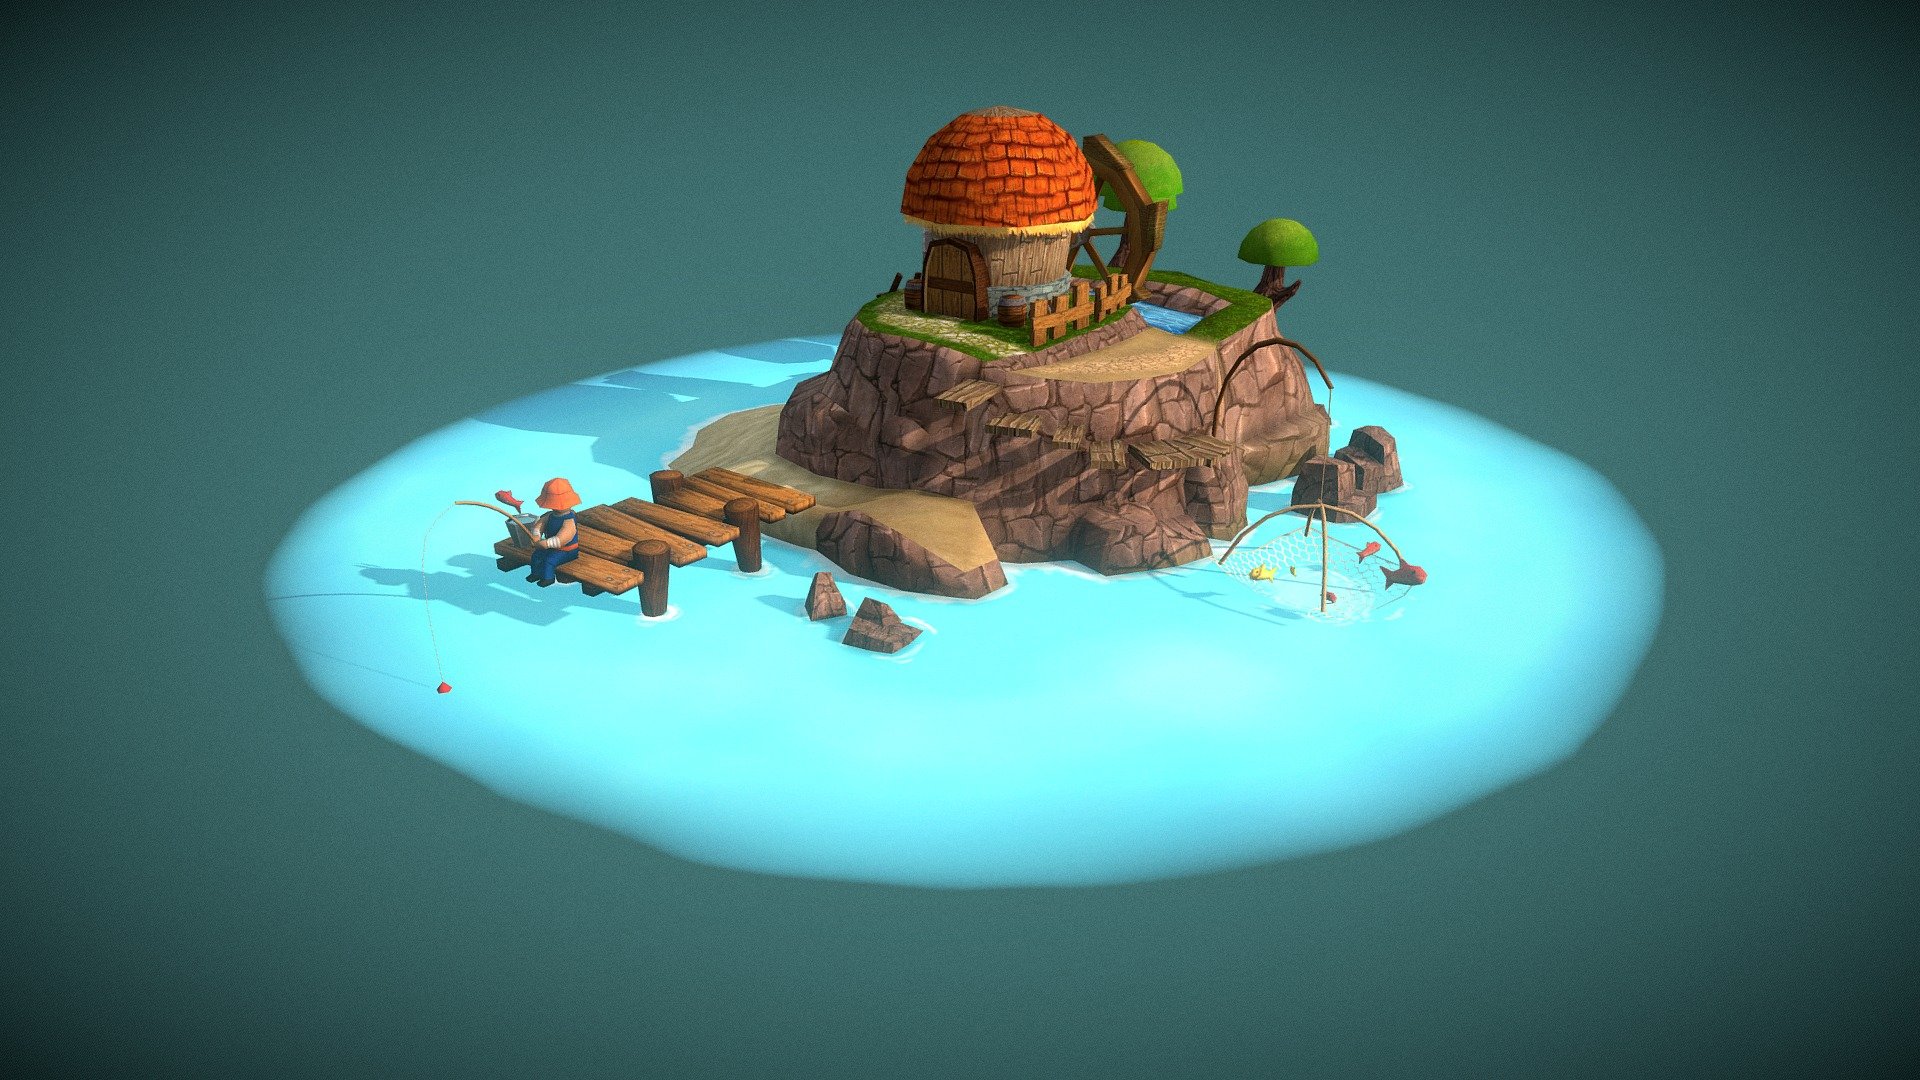 Final Project for Assignment - Diorama of Secret Island - Diorama of Secret Island - 3D model by DimasRamdhan 3d model